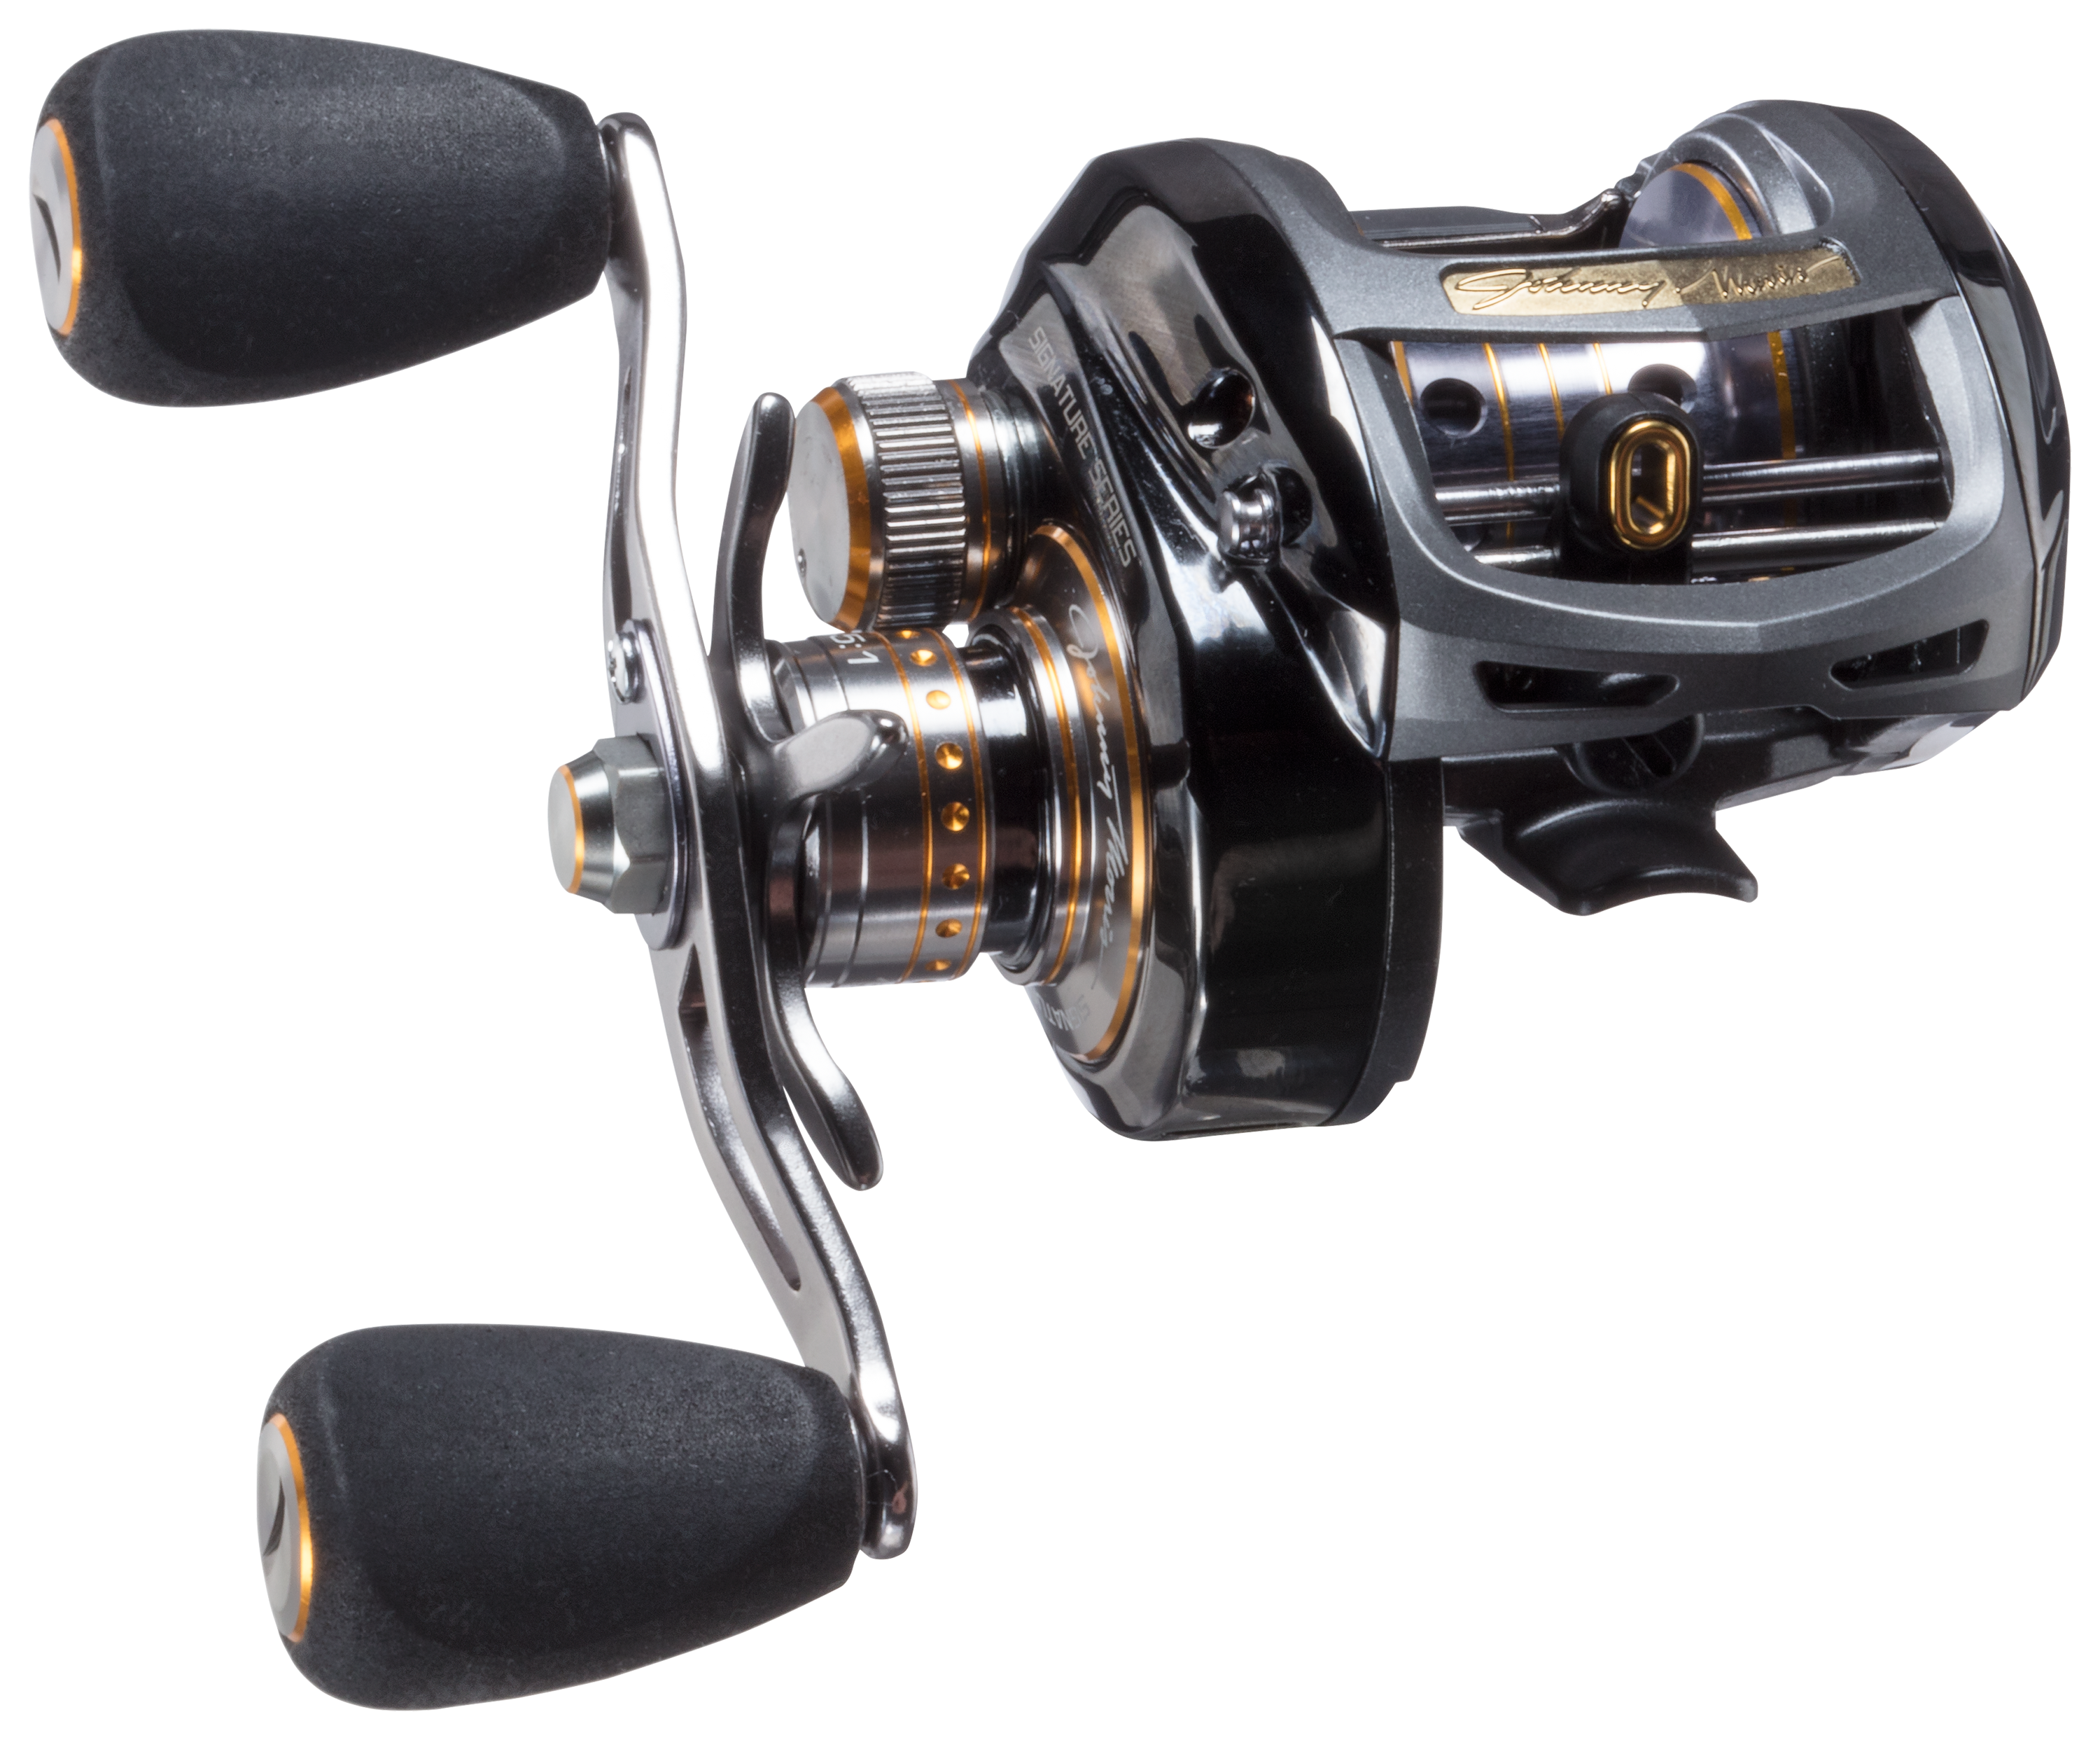 Bass Pro Shops Johnny Morris Signature Series baitcaster fishing reel for  Sale in Alvin, TX - OfferUp